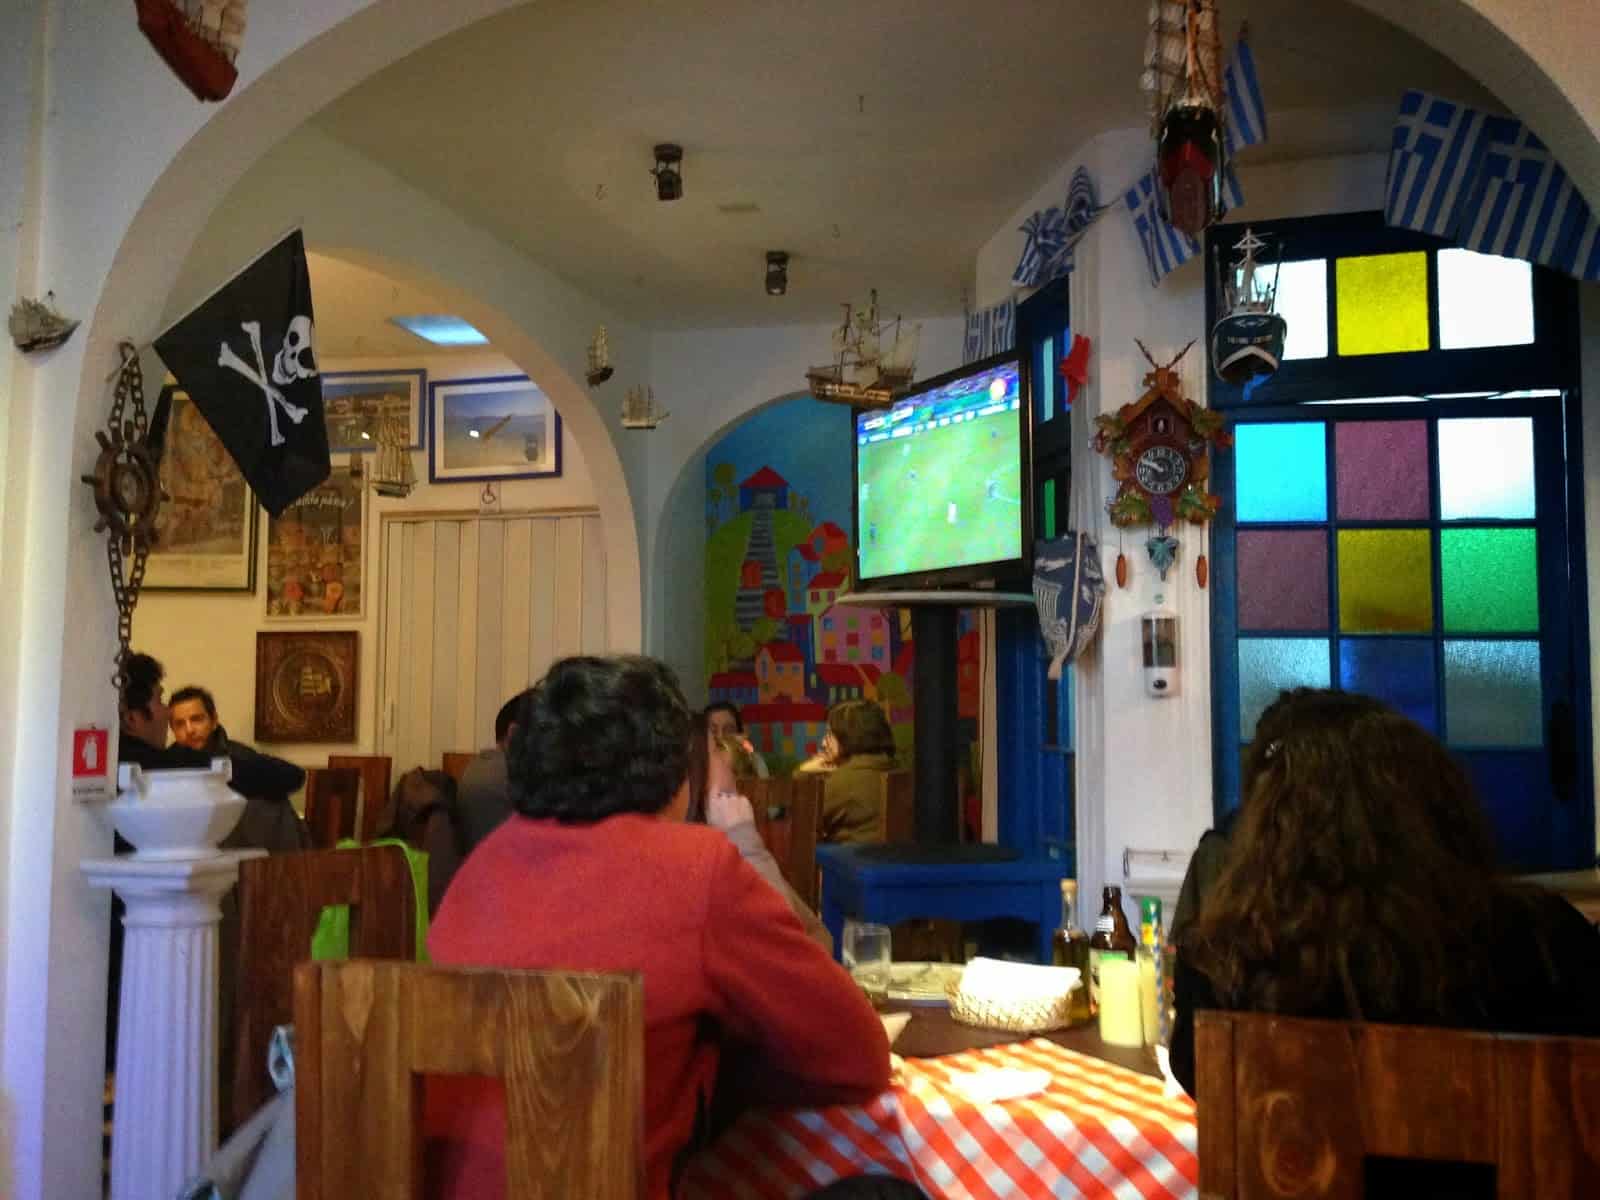 Watching the game at Opa Opa in Santiago, Chile